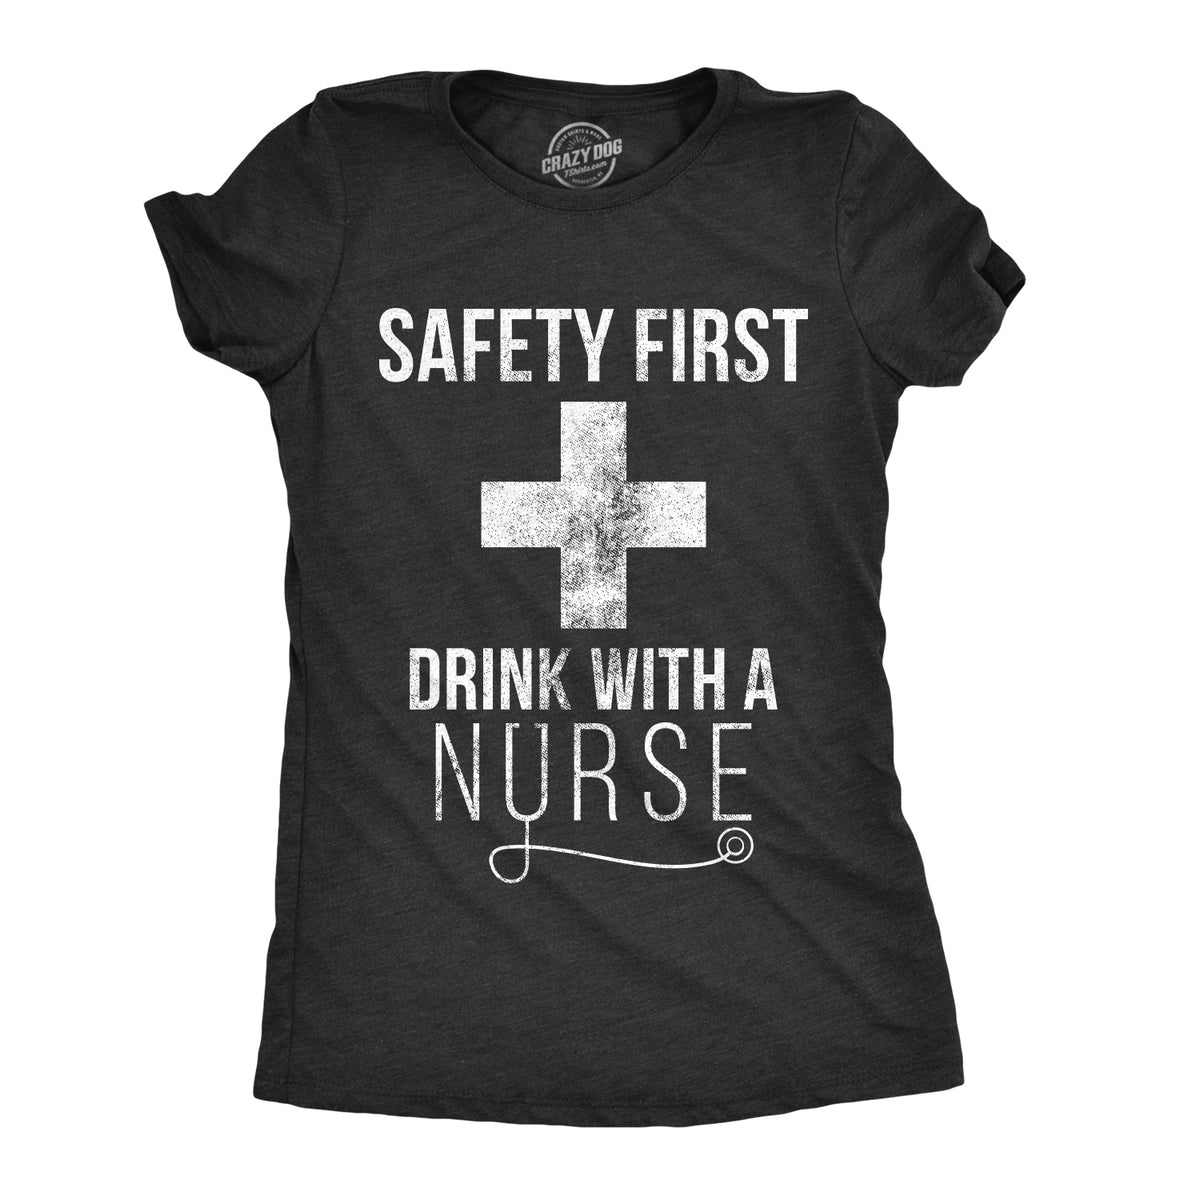 Funny Heather Black Safety First Drink With A Nurse Womens T Shirt Nerdy drinking Tee